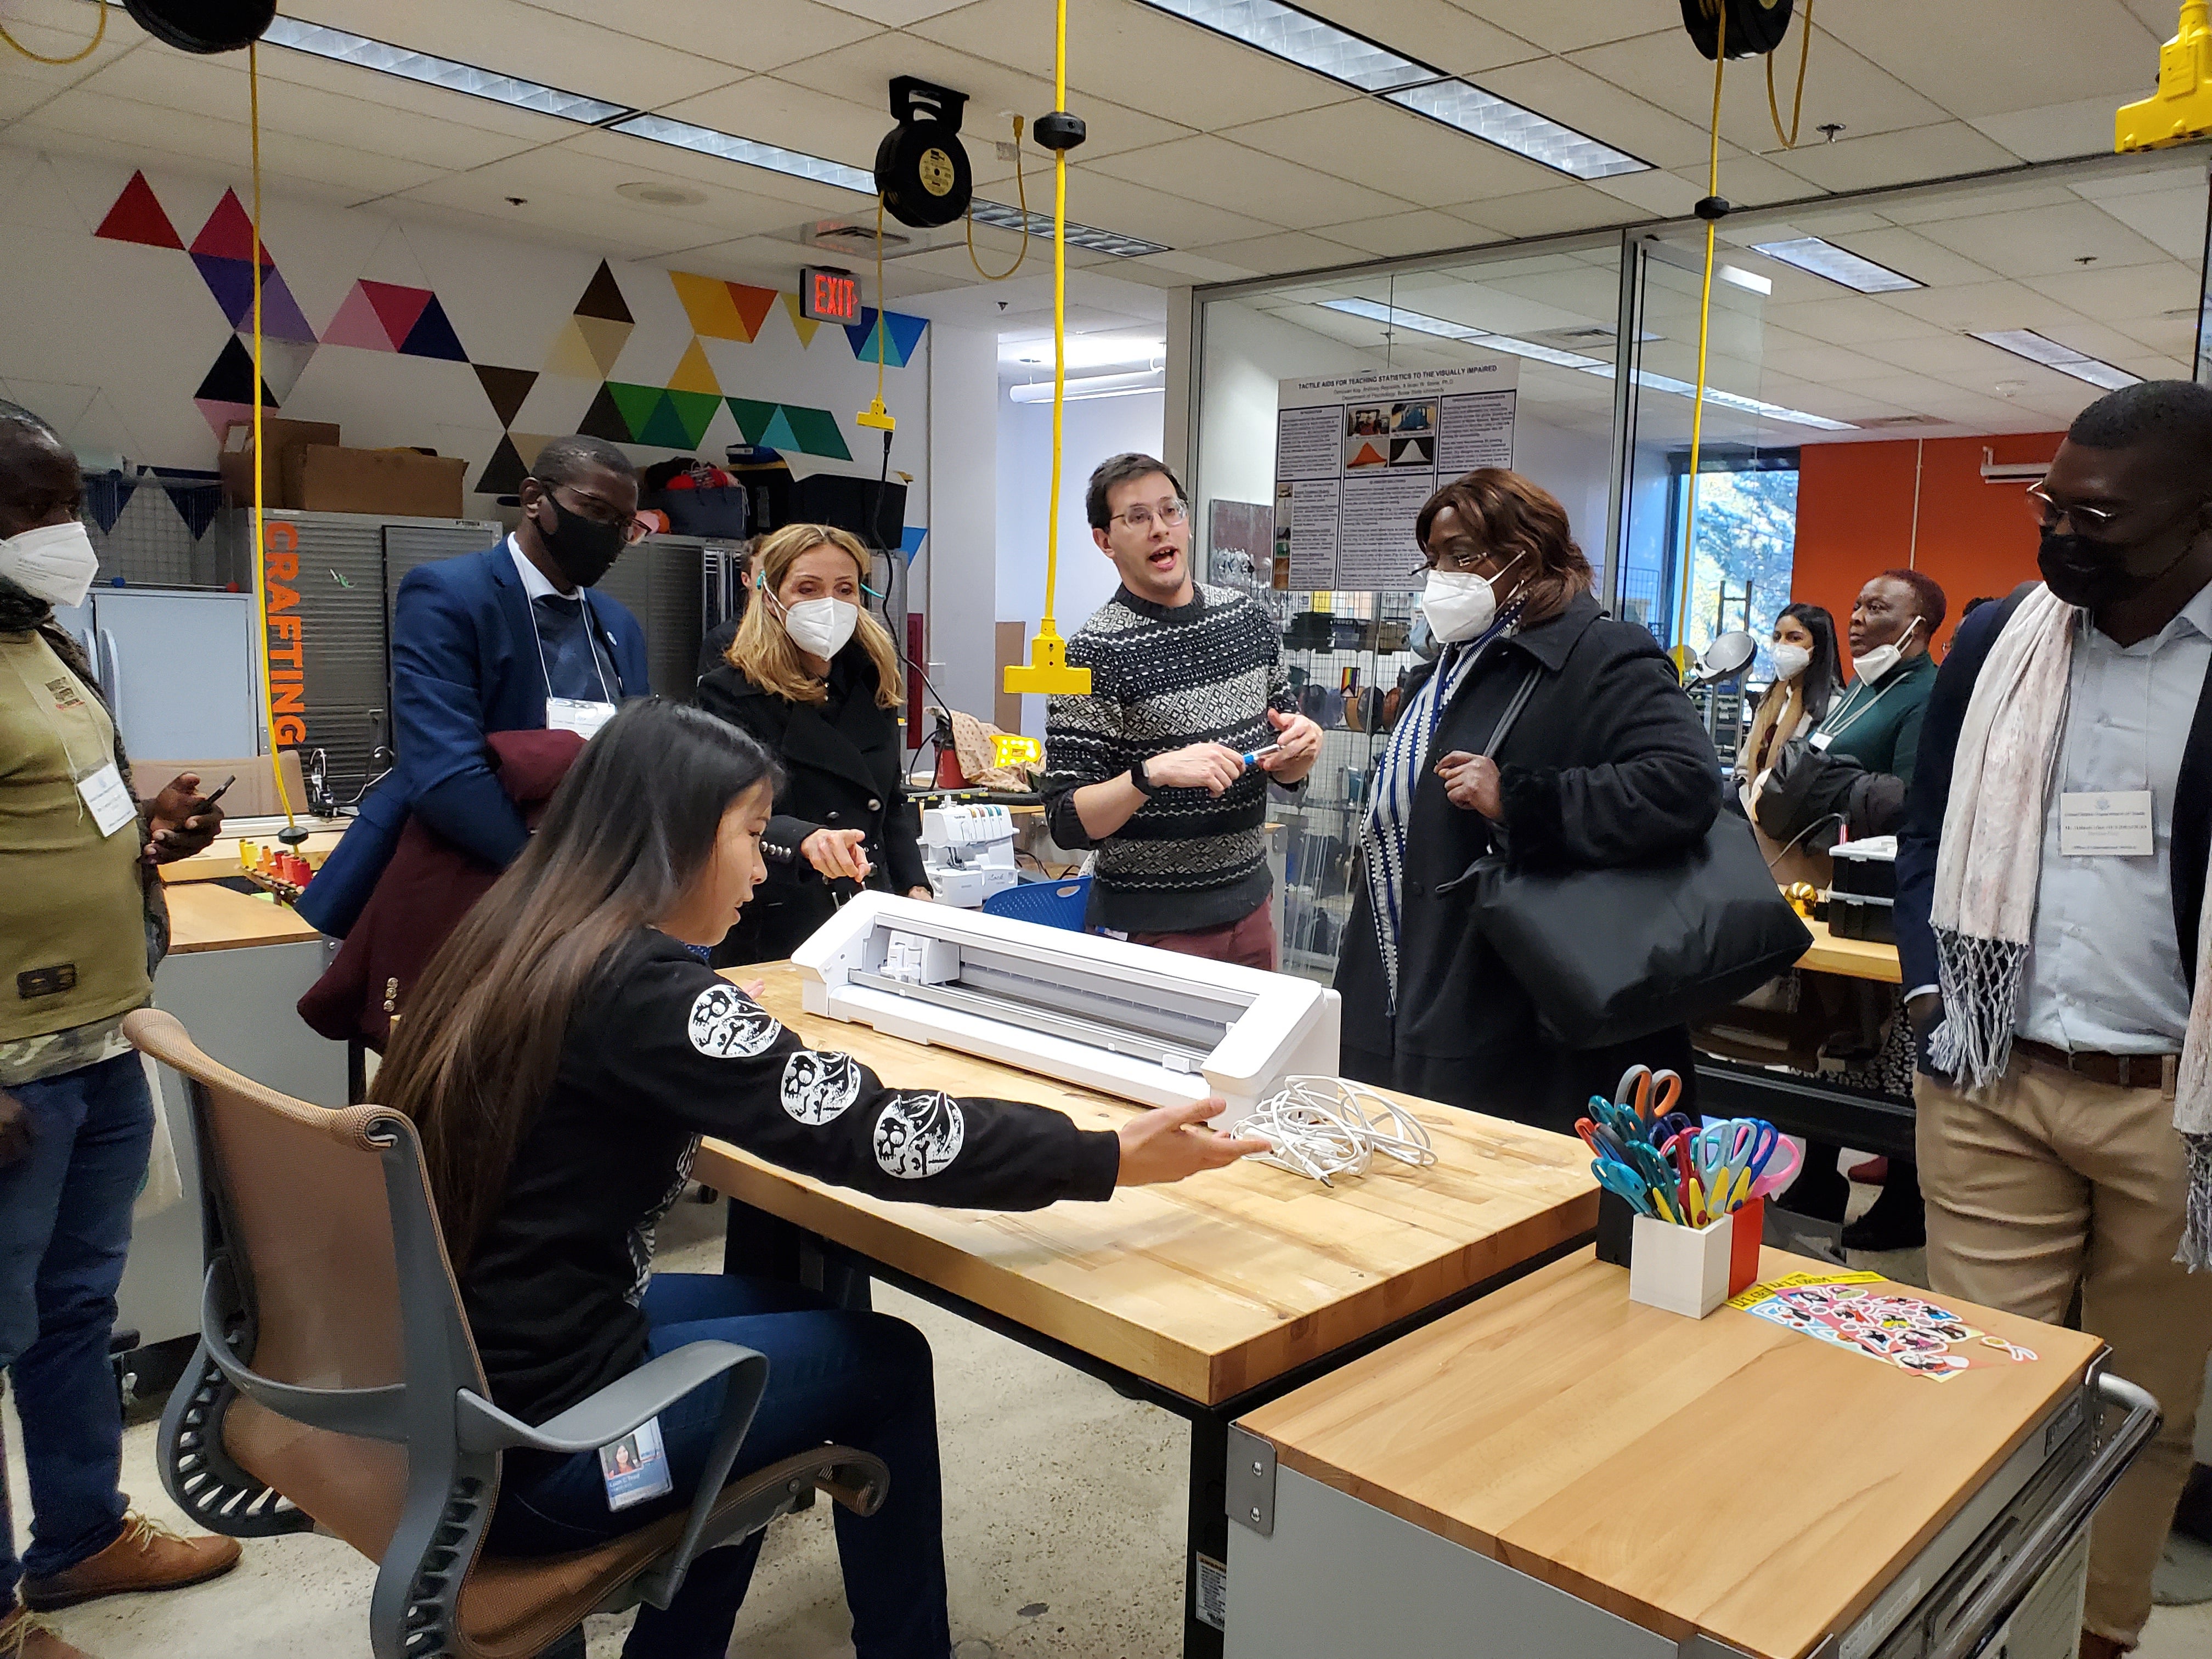 Visitors exploring the MakerLab, located on the 2nd floor of the Albertson's Library